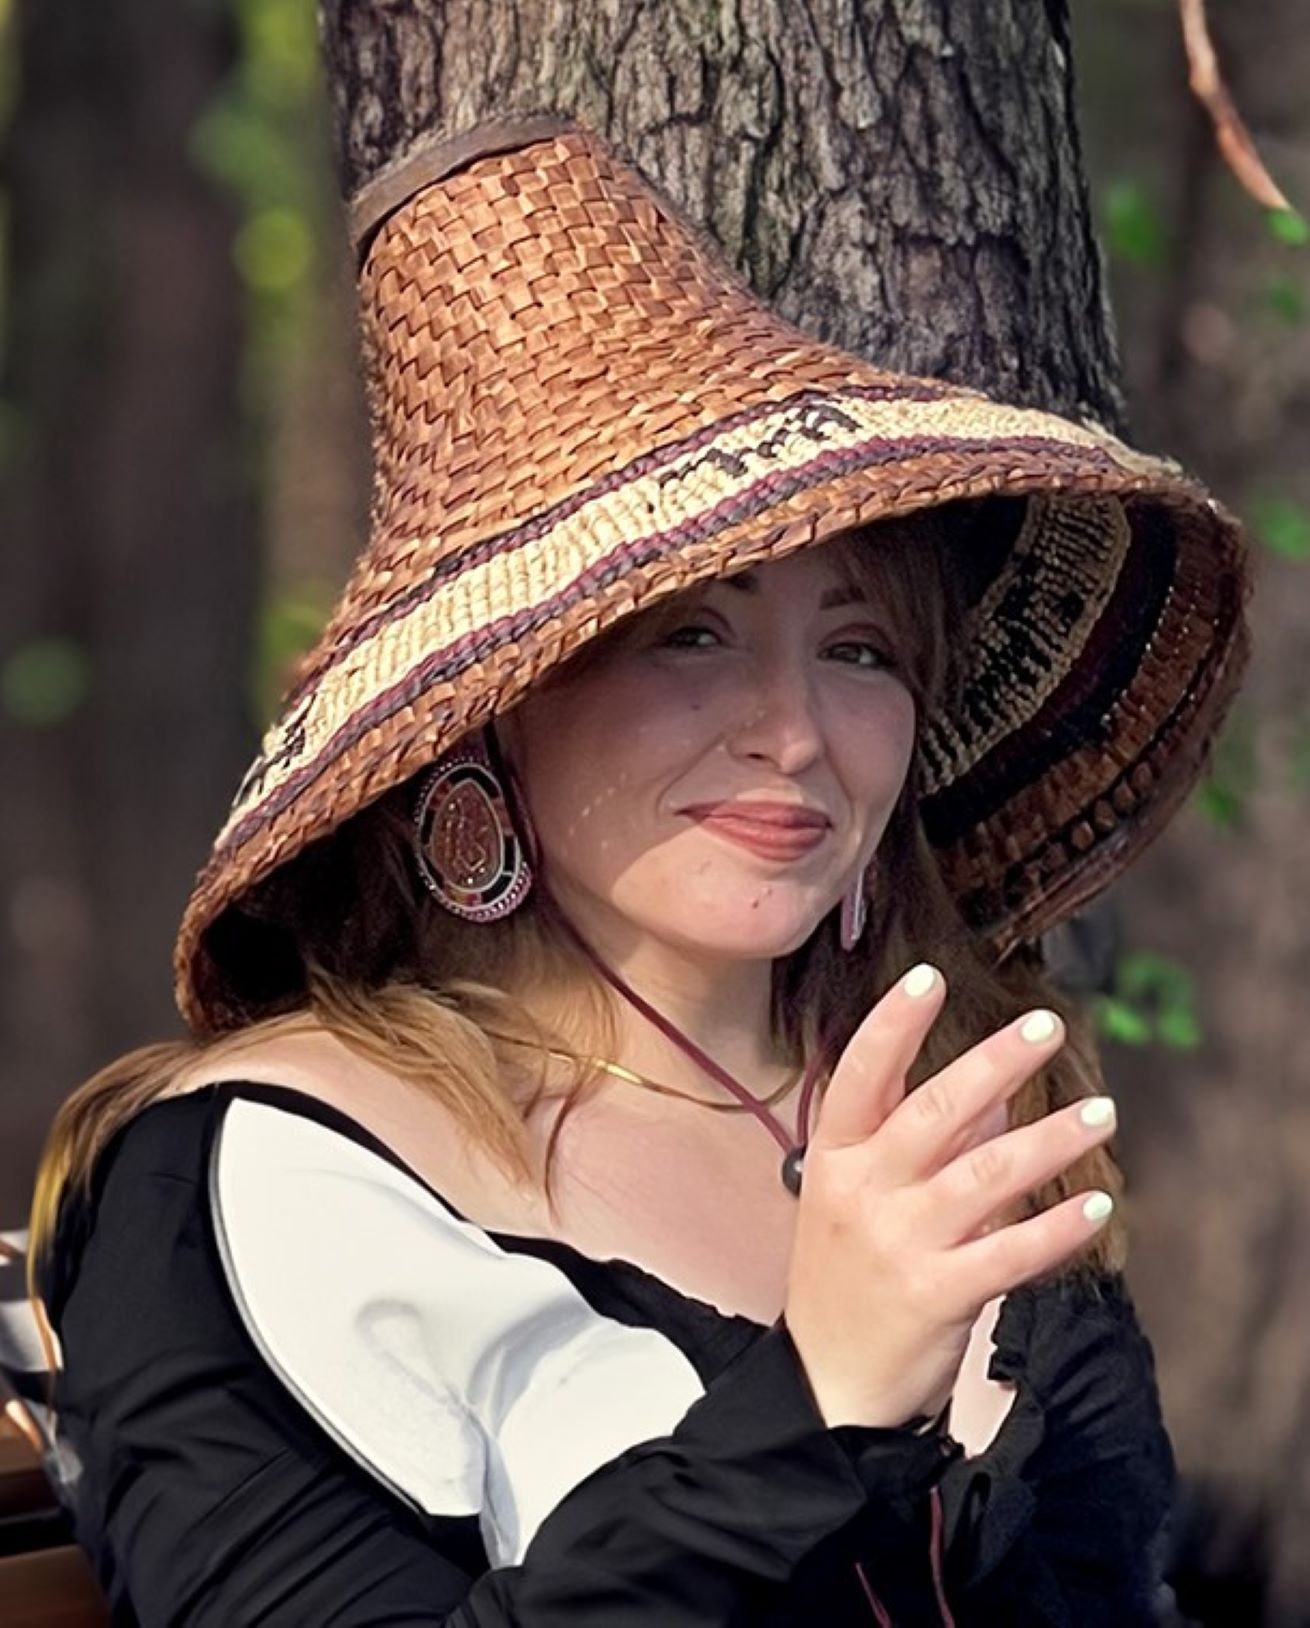 Kimy smiling, wearing a large woven brown hat and right hand lifted, standing in front of tree